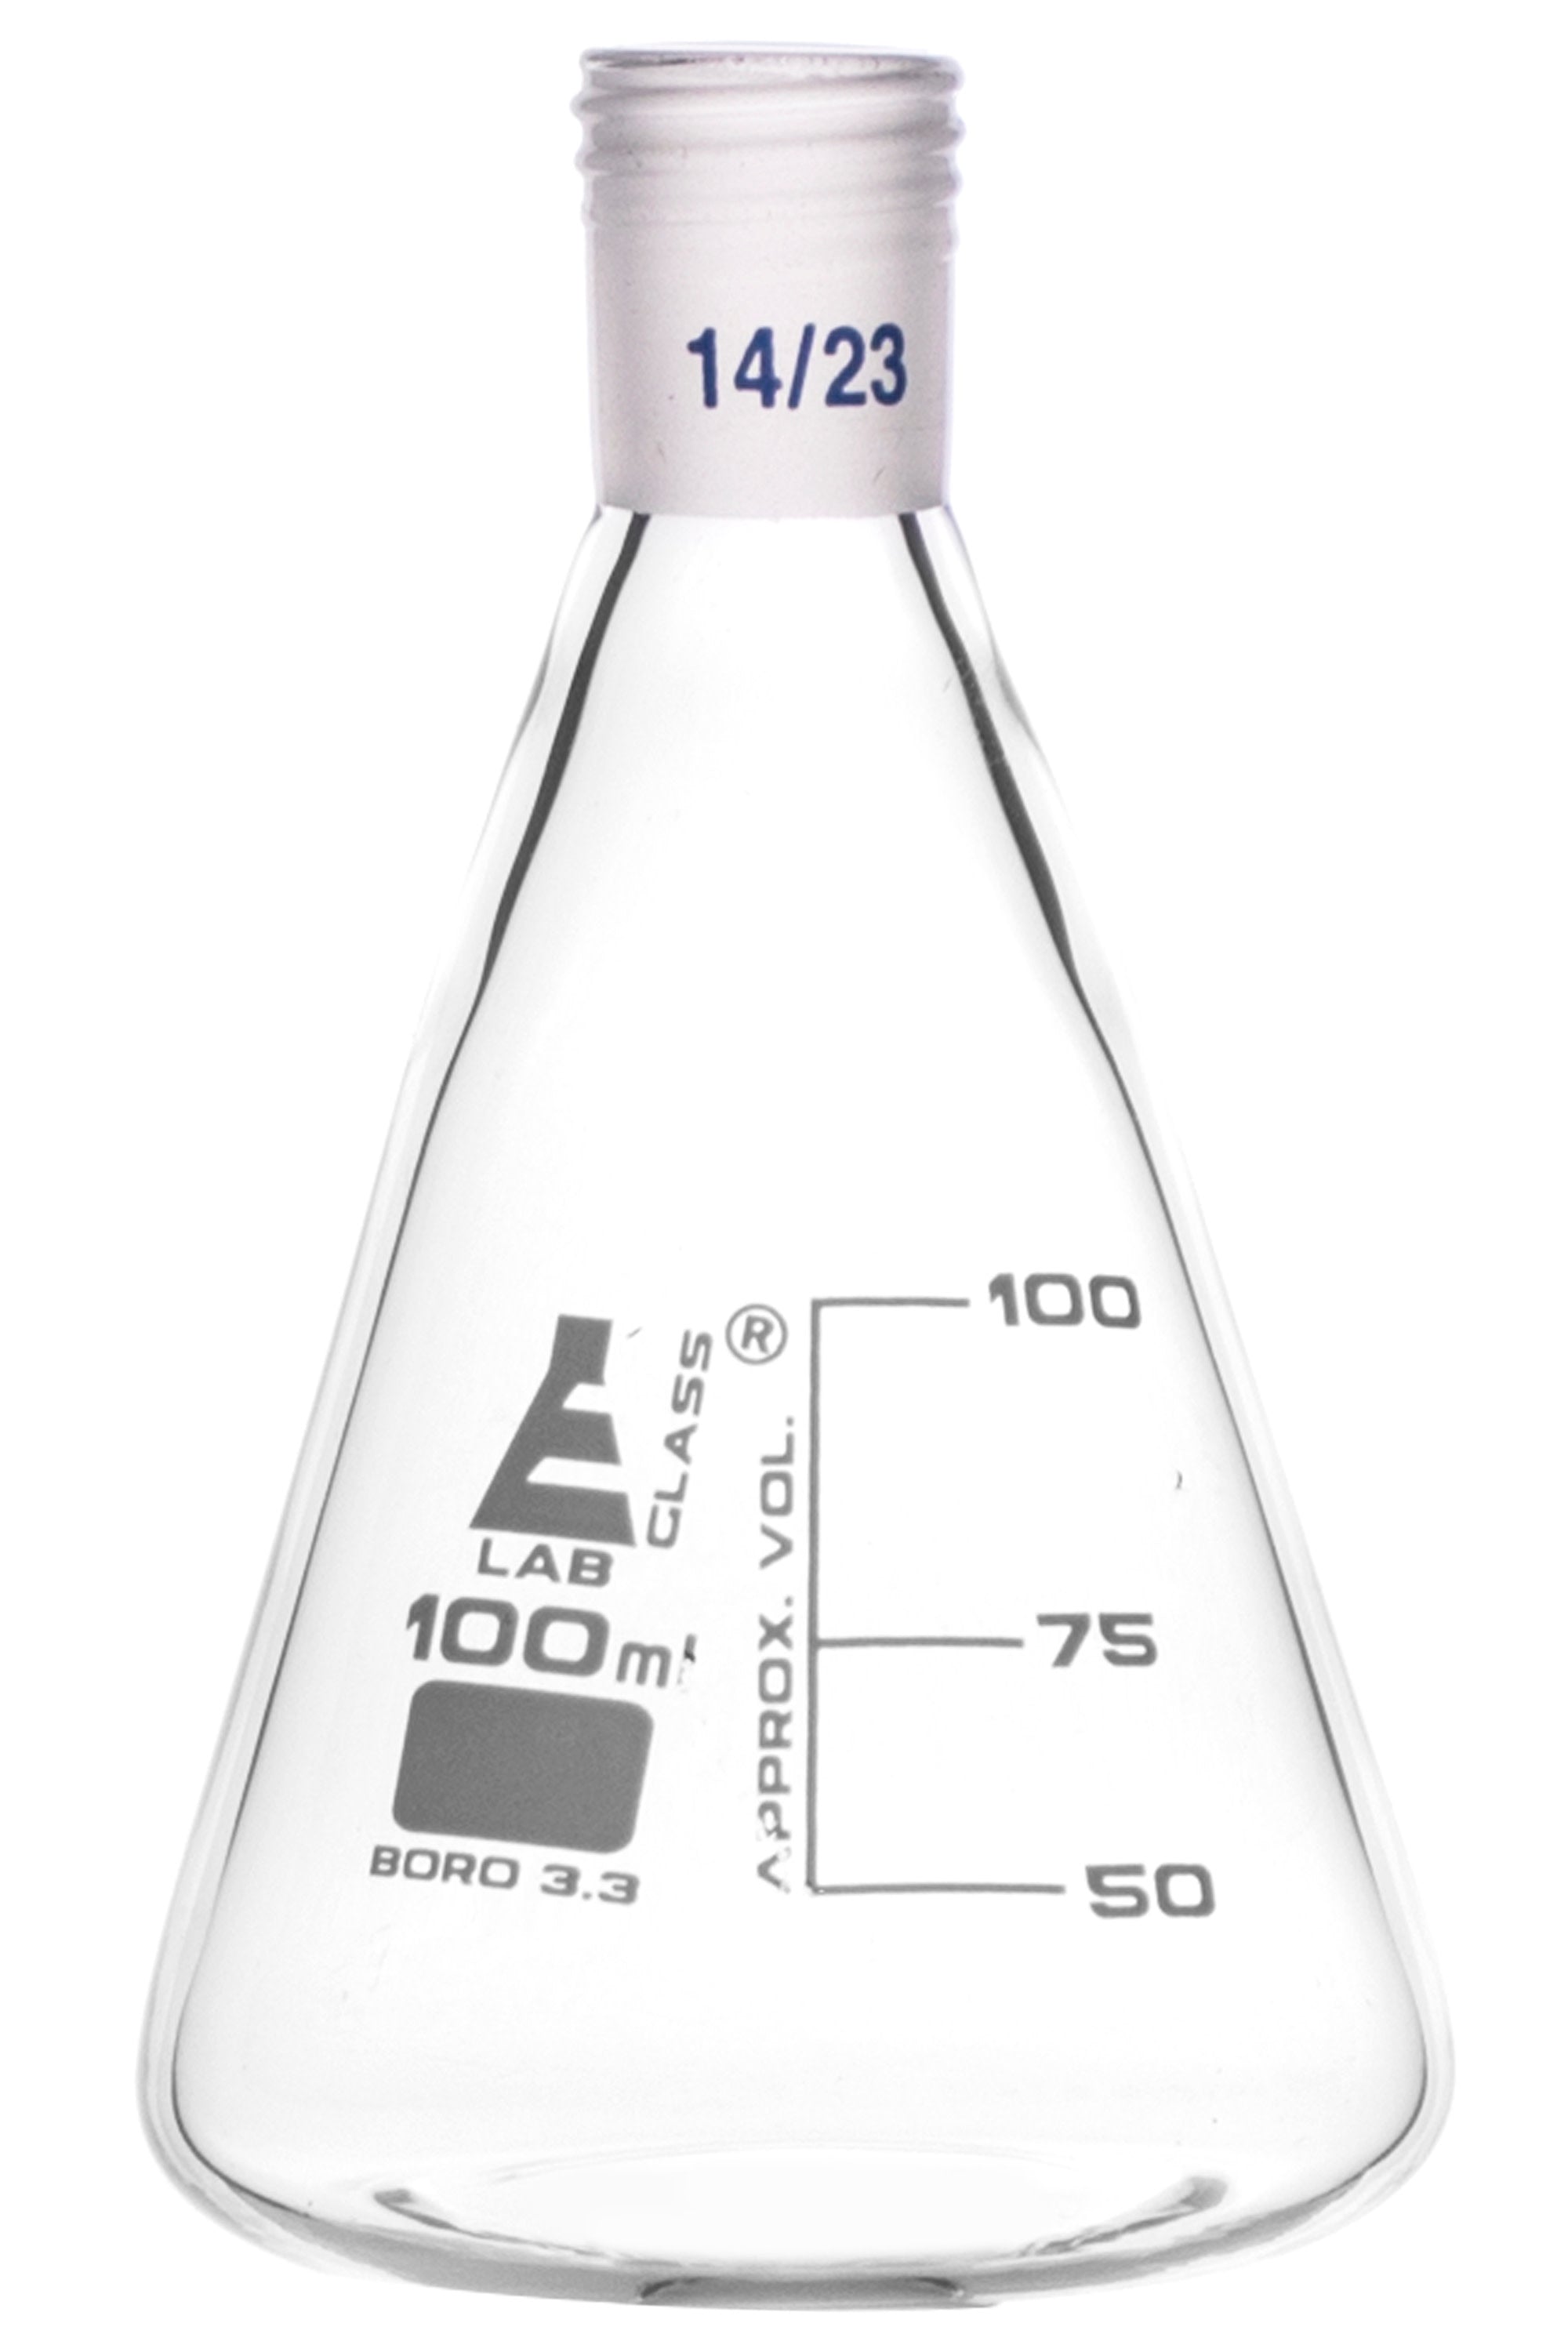 Borosilicate Glass Erlenmeyer Flask with 14/23 Screw Thread Neck Joint, 100 ml, 25 ml Graduations, Autoclavable